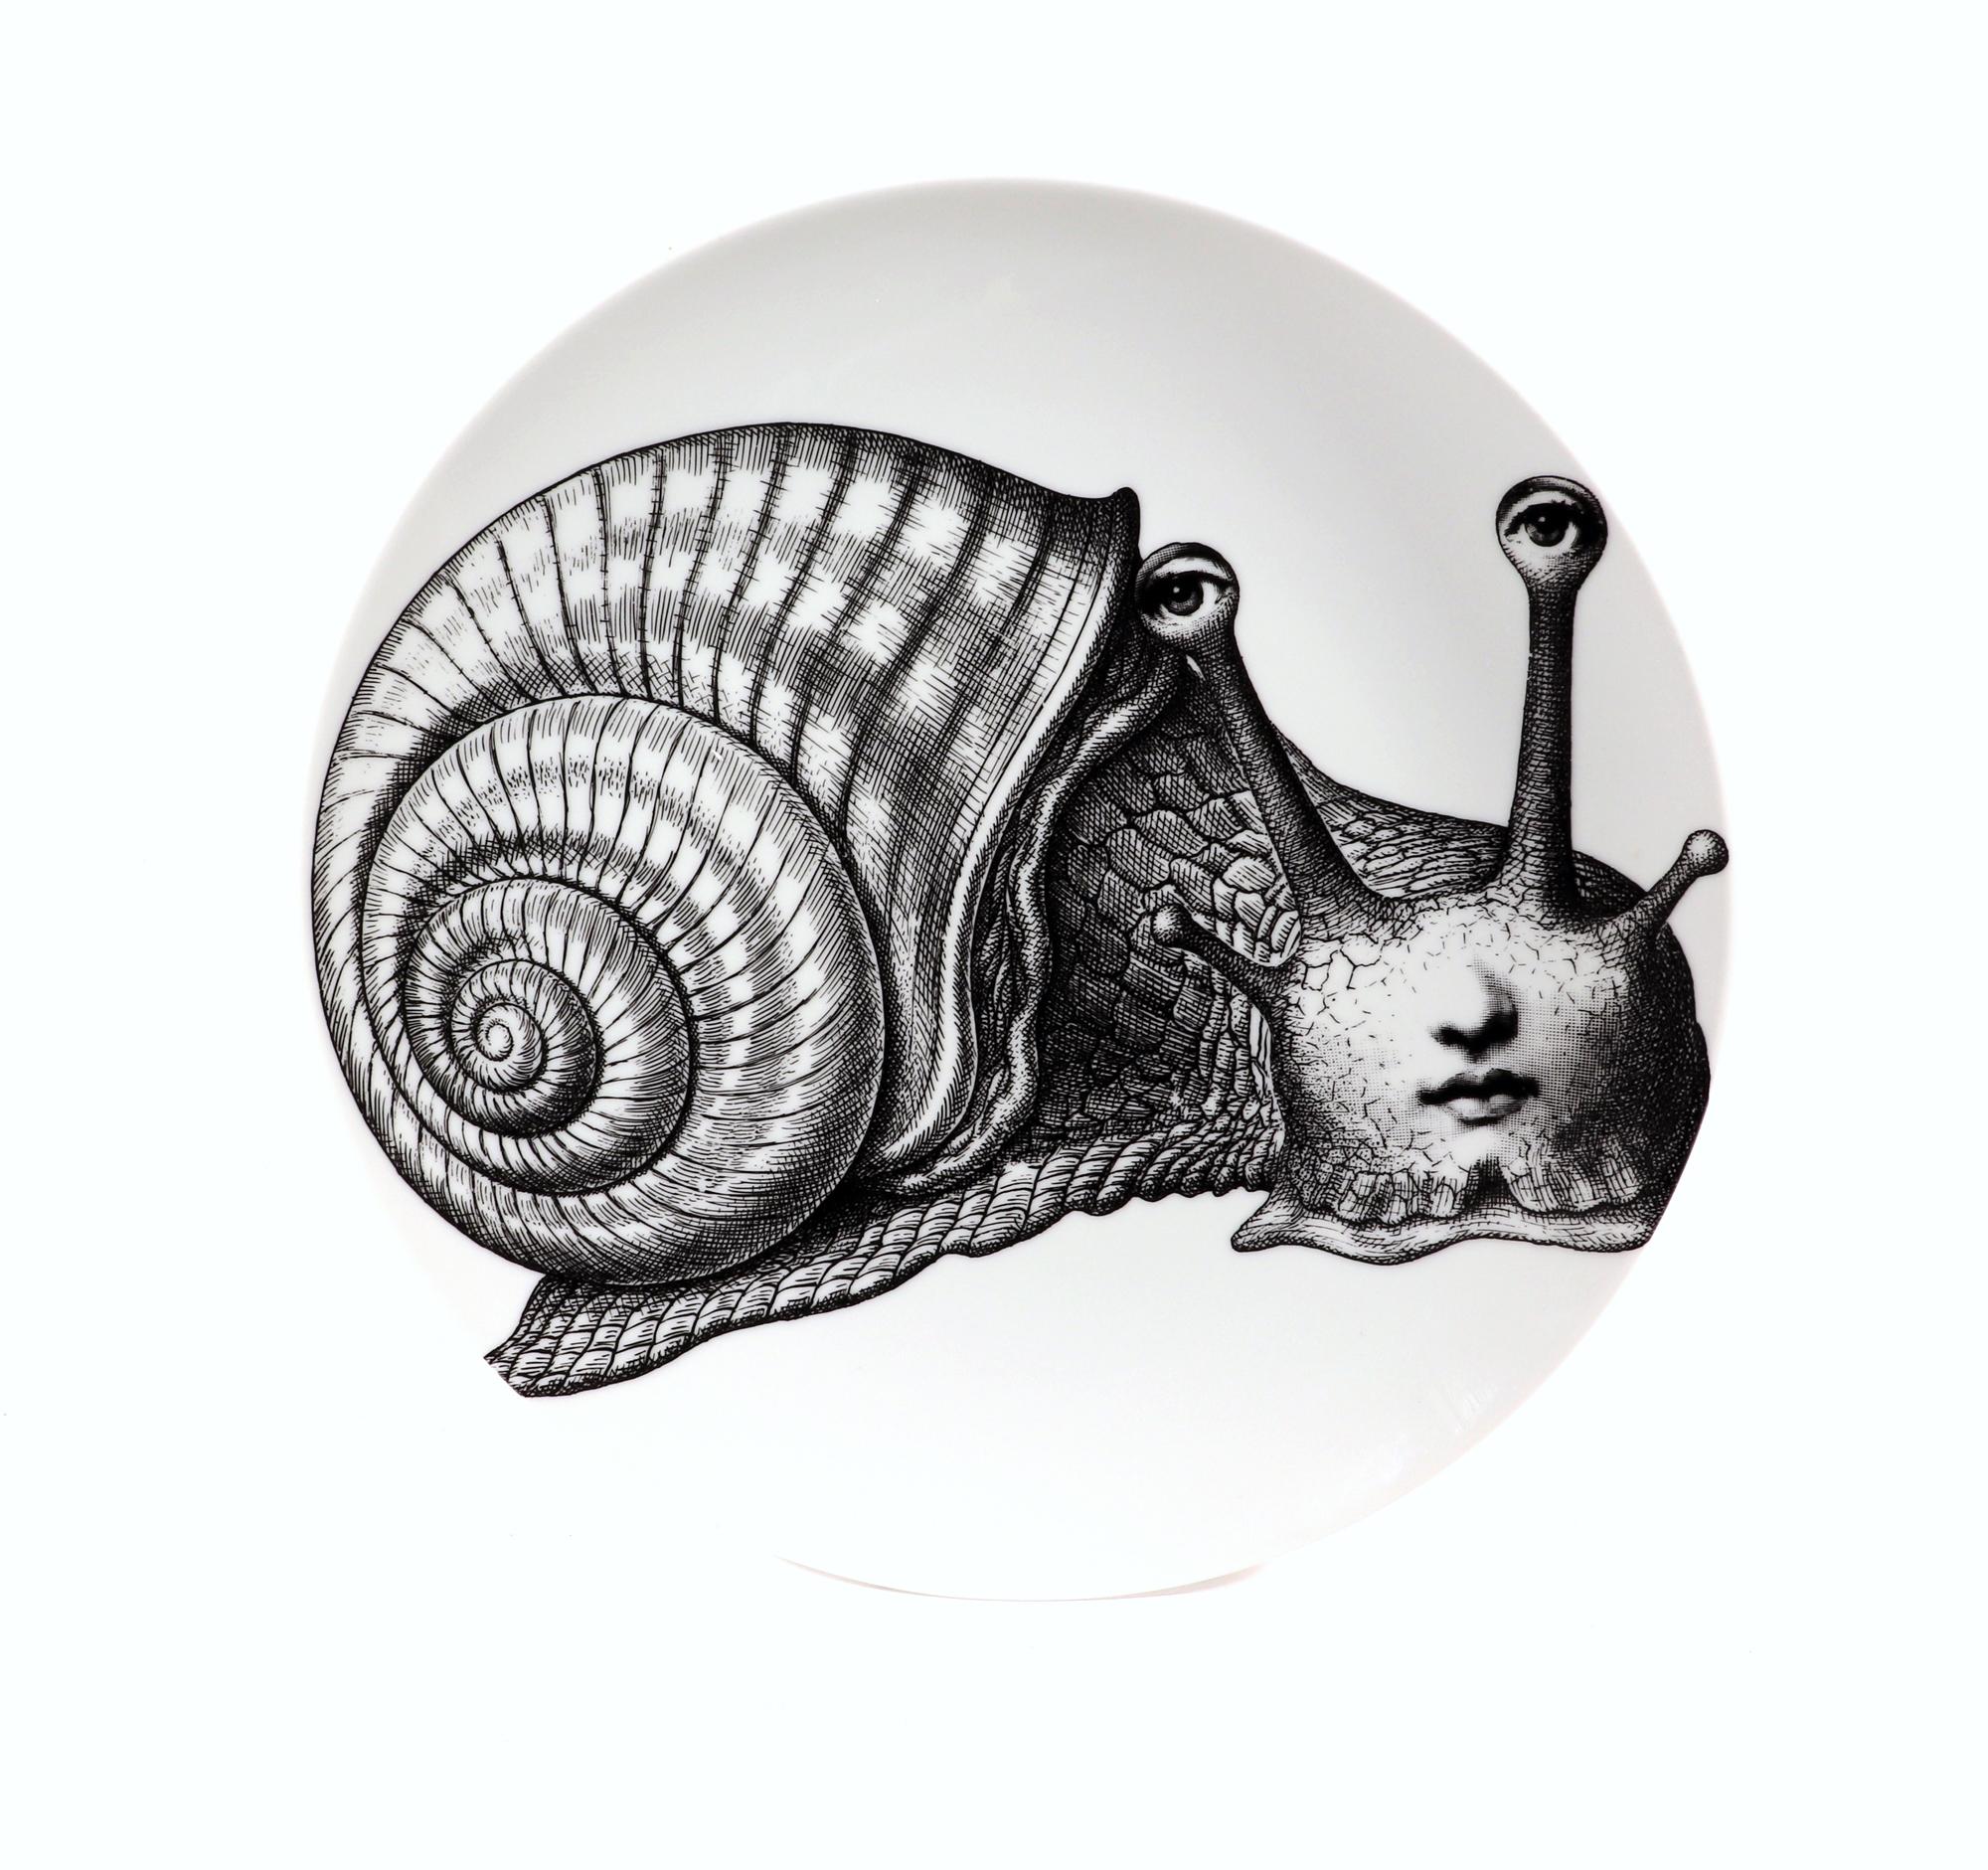 Fornasetti porcelain Surrealist Themes & Variation plate #260,
The Snail,
Atelier Fornasetti

The Fornasetti porcelain plate in the Themes & Variation pattern depicts a surreal depiction of a snail with the face of Lina Cavalieri, Piero Fornasetti's